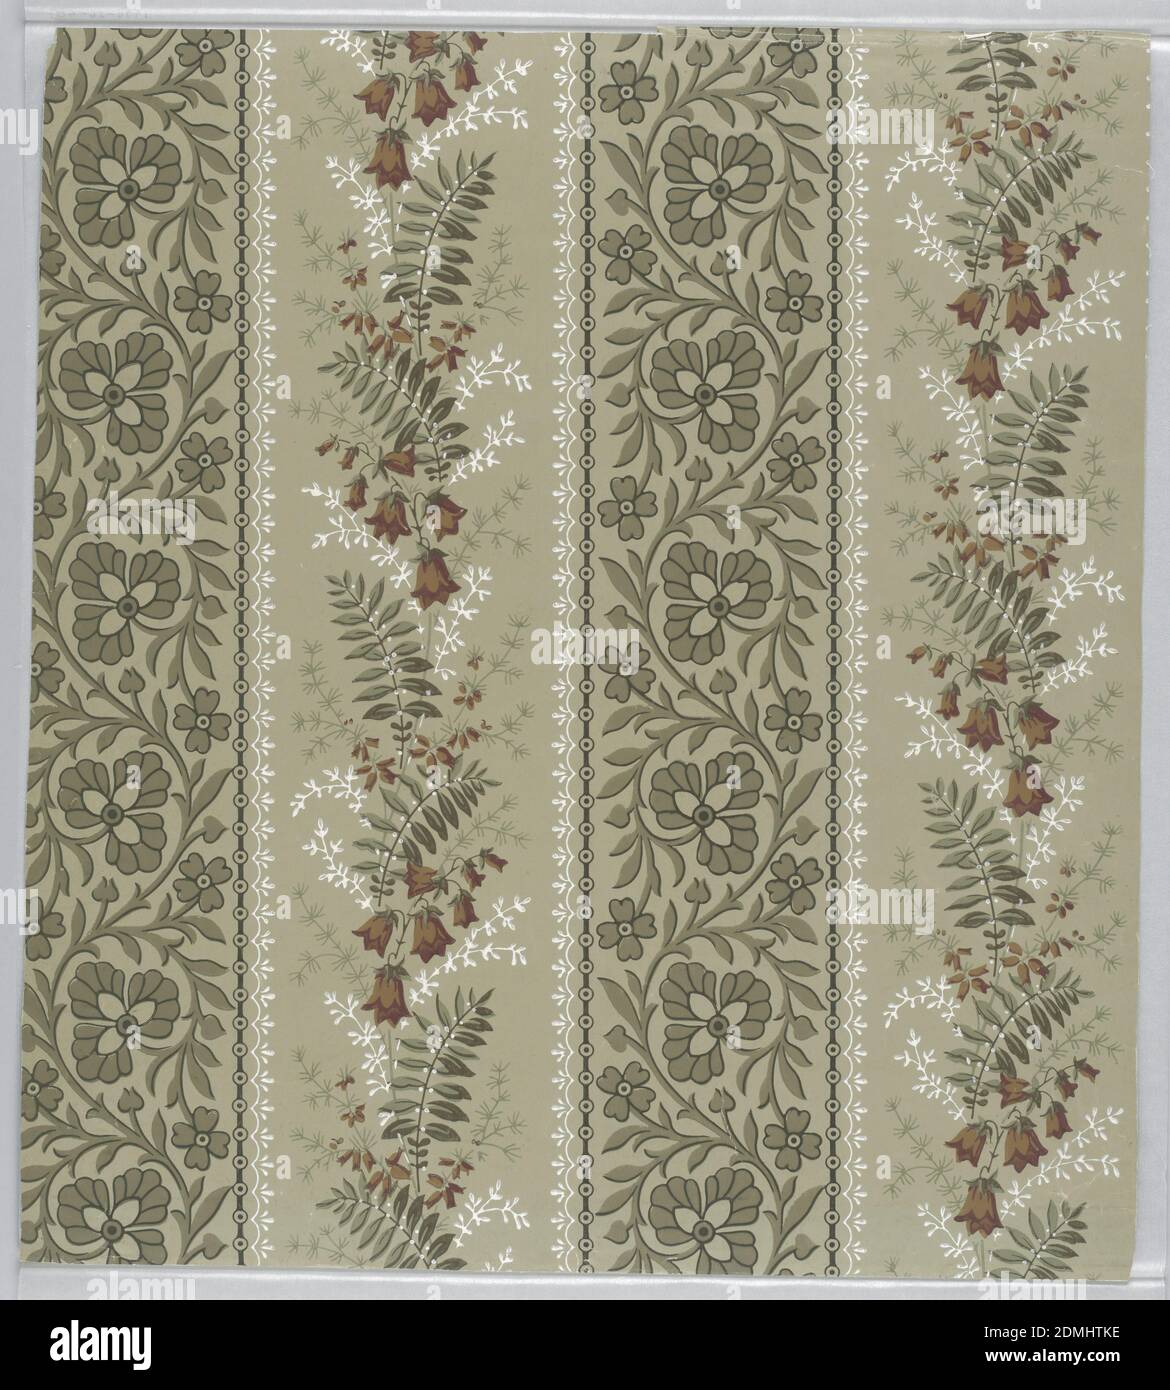 Sidewall, Machine-printed paper, Aesthetic pattern with two columns of motifs alternately repeated; one with stylized three-petaled flower on vine glide-reflected vertically; black-and-white stylized border reminiscent of lace; second motif is of naturalistic bellflowers on leafy stalk also glide-reflected vertically; block shading; apart from dark red flowers and white detailing, color scheme is of muted greens, green ground., USA, ca. 1880, Wallcoverings, Sidewall Stock Photo